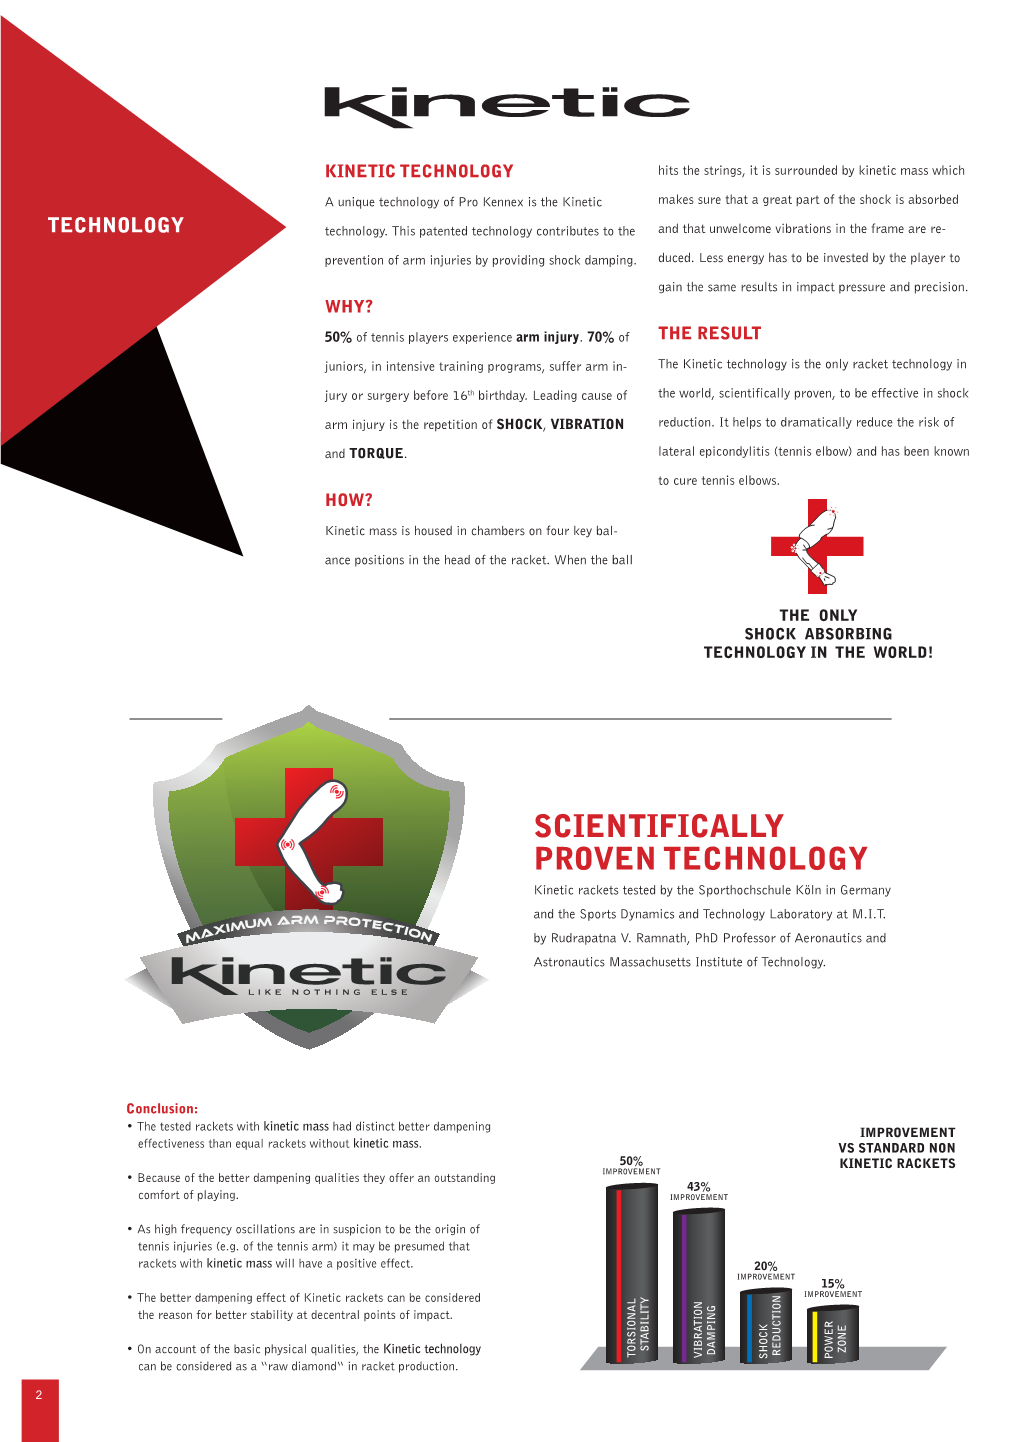 SCIENTIFICALLY PROVEN TECHNOLOGY Kinetic Rackets Tested by the Sporthochschule Köln in Germany and the Sports Dynamics and Technology Laboratory at M.I.T